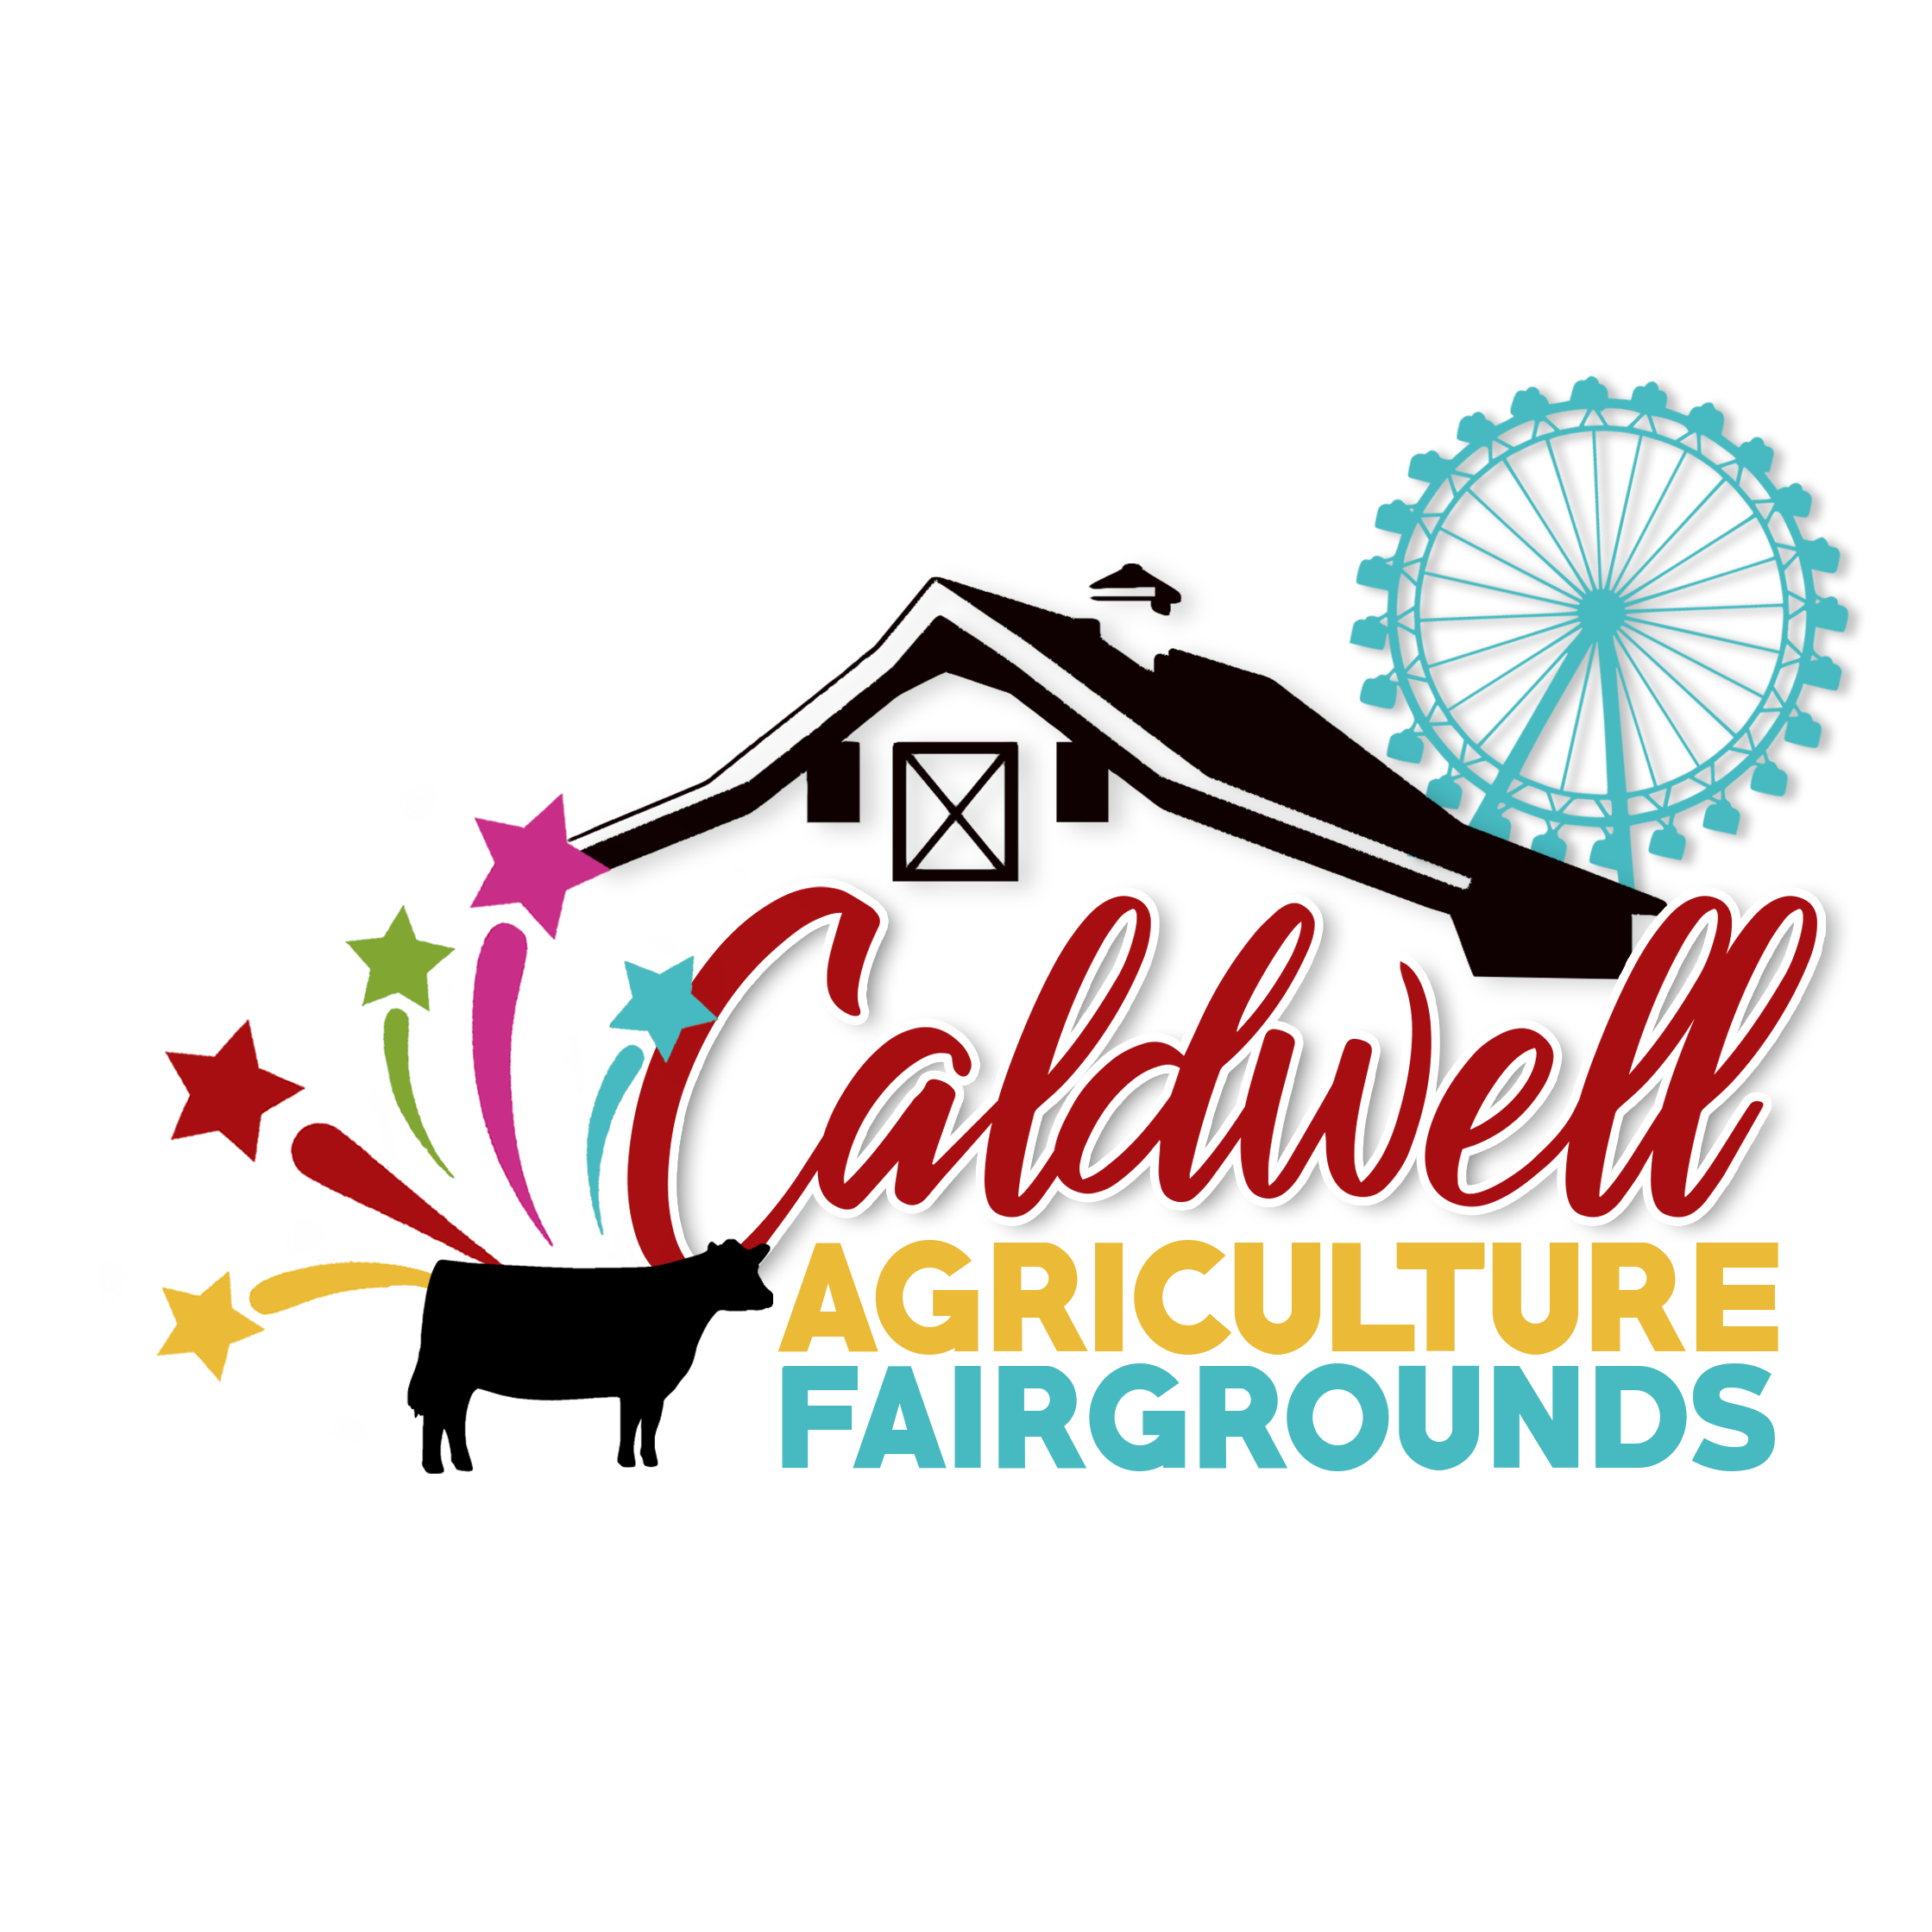 Caldwell Agriculture Farigrounds